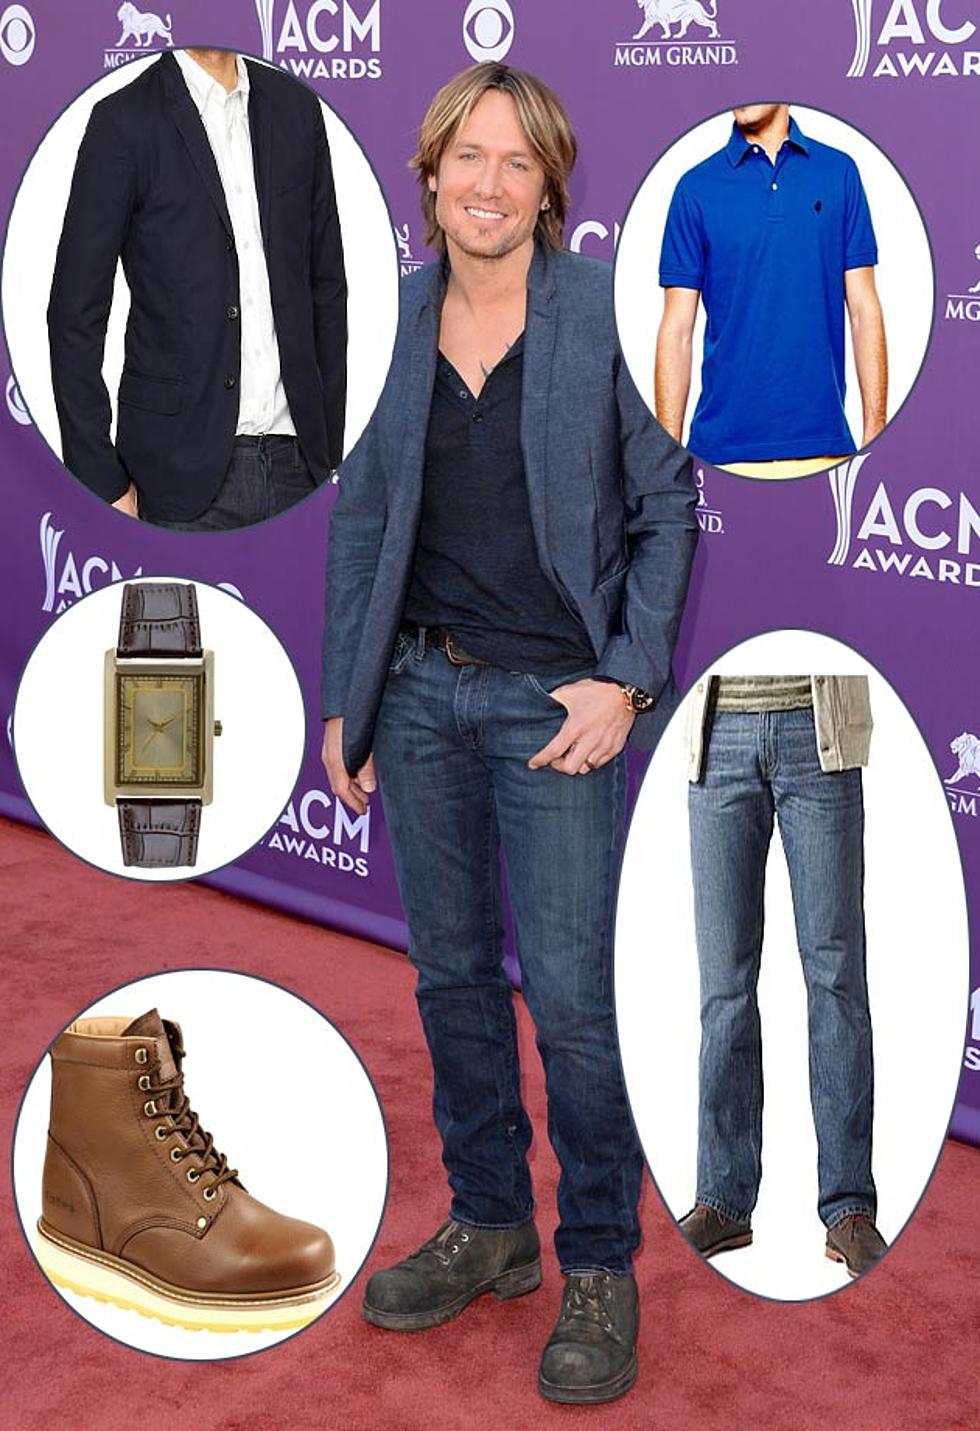 Keith Urban Dresses Up Denim With a Blazer and Boots &#8211; Get the Look